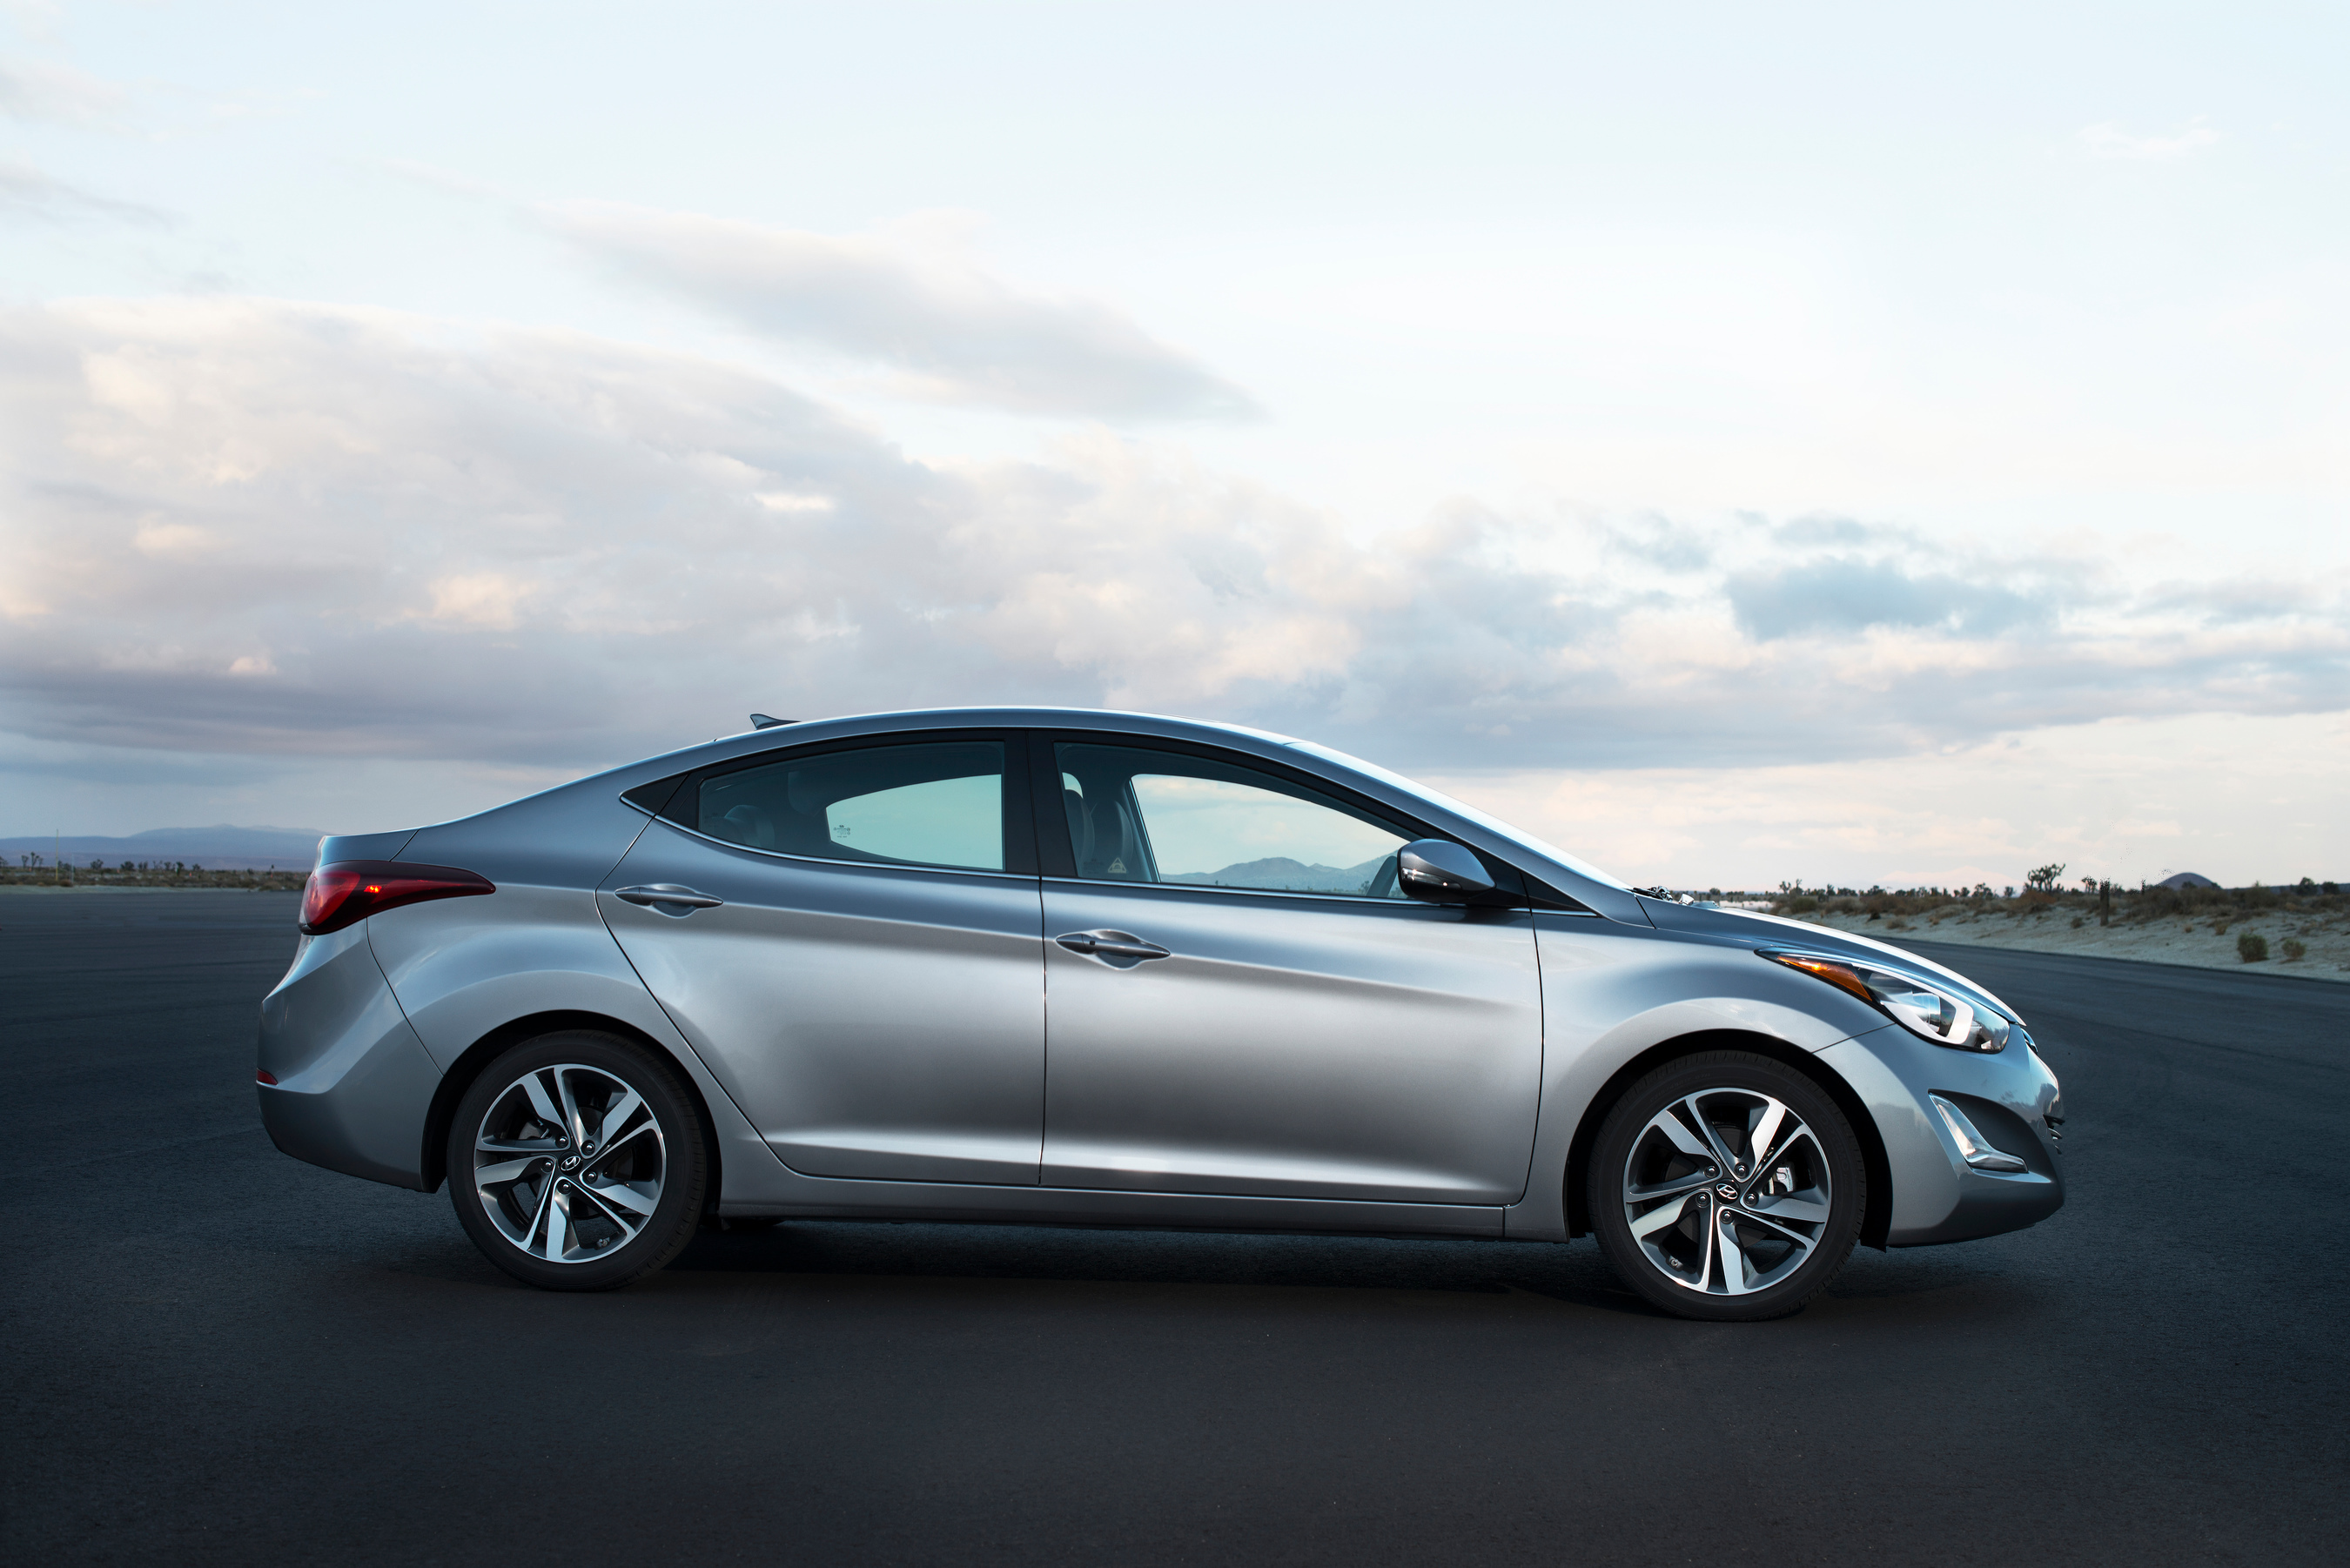 2015 Elantra Brings Feature-Packed Value To Shoppers